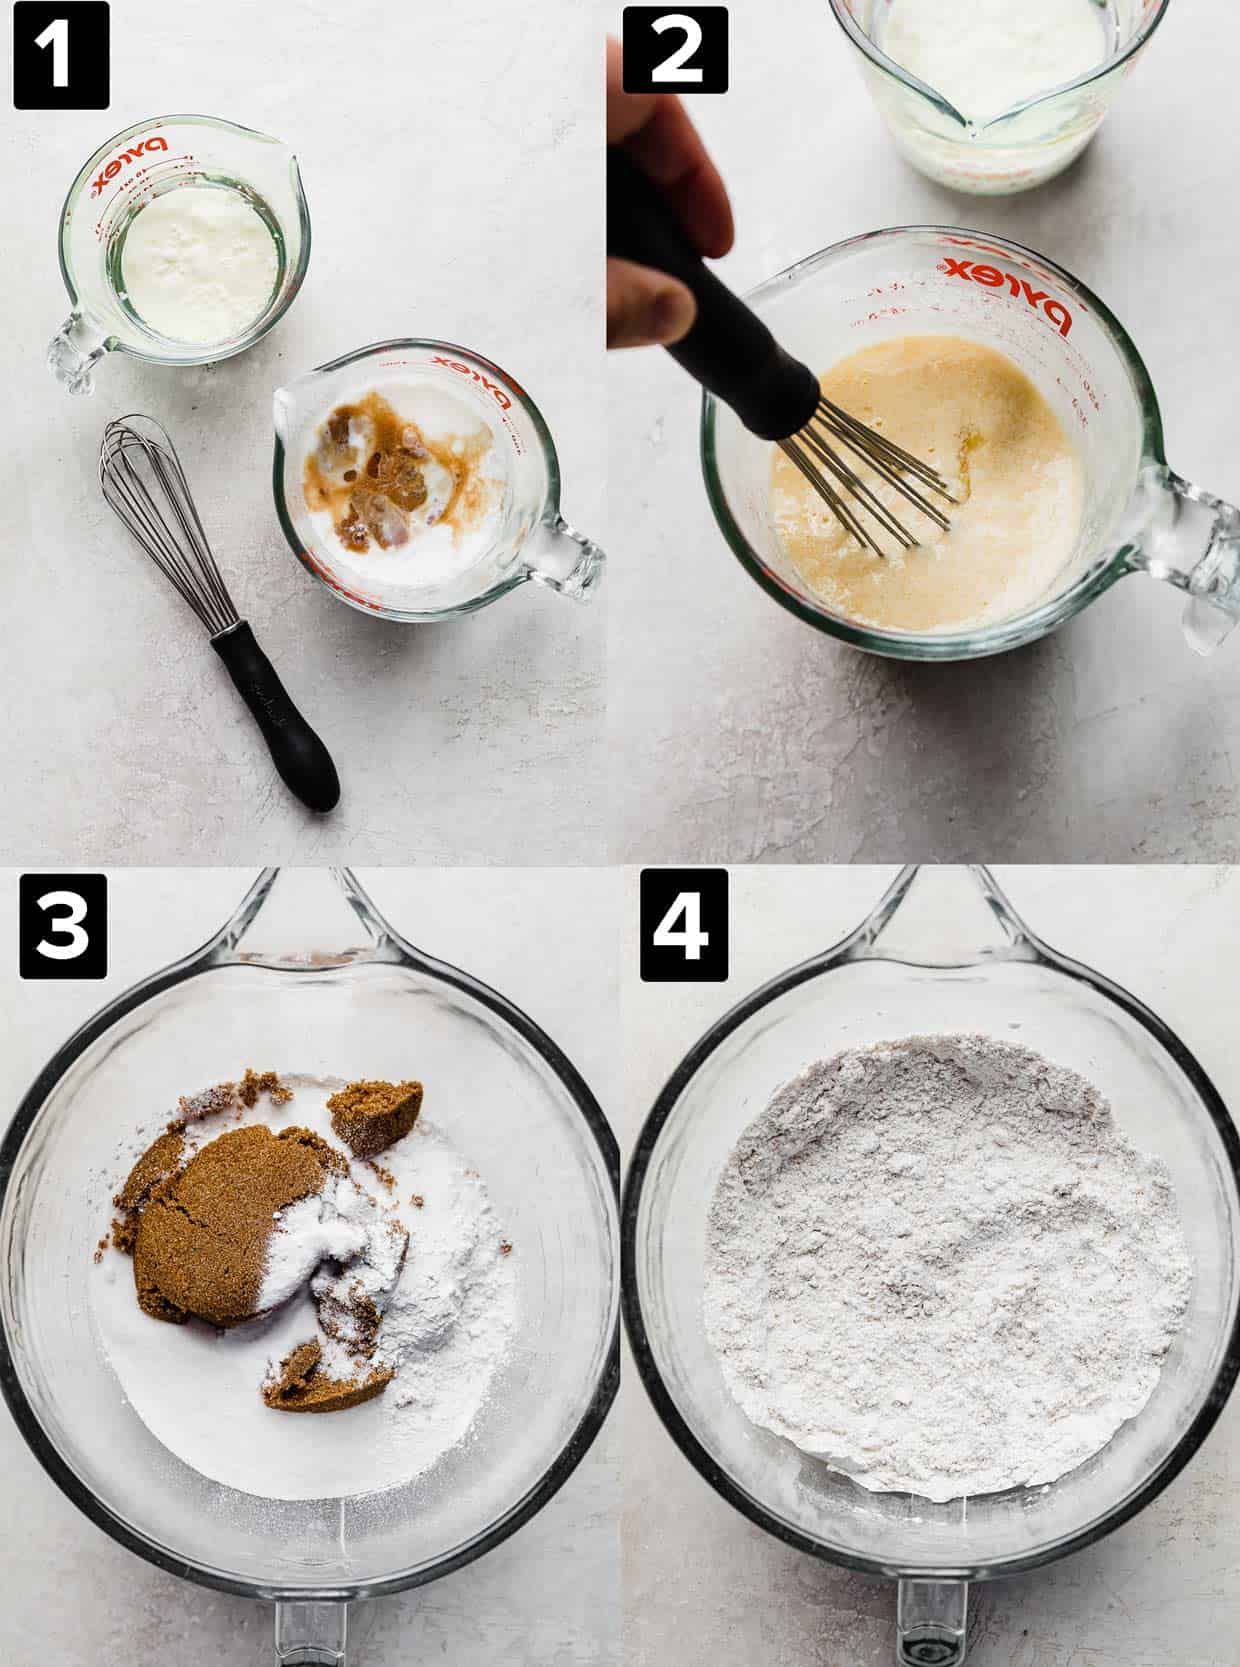 Four photos showing the making of a Butterscotch Cake, a glass bowl with dry ingredients, and liquid glass bowl with buttermilk in it.